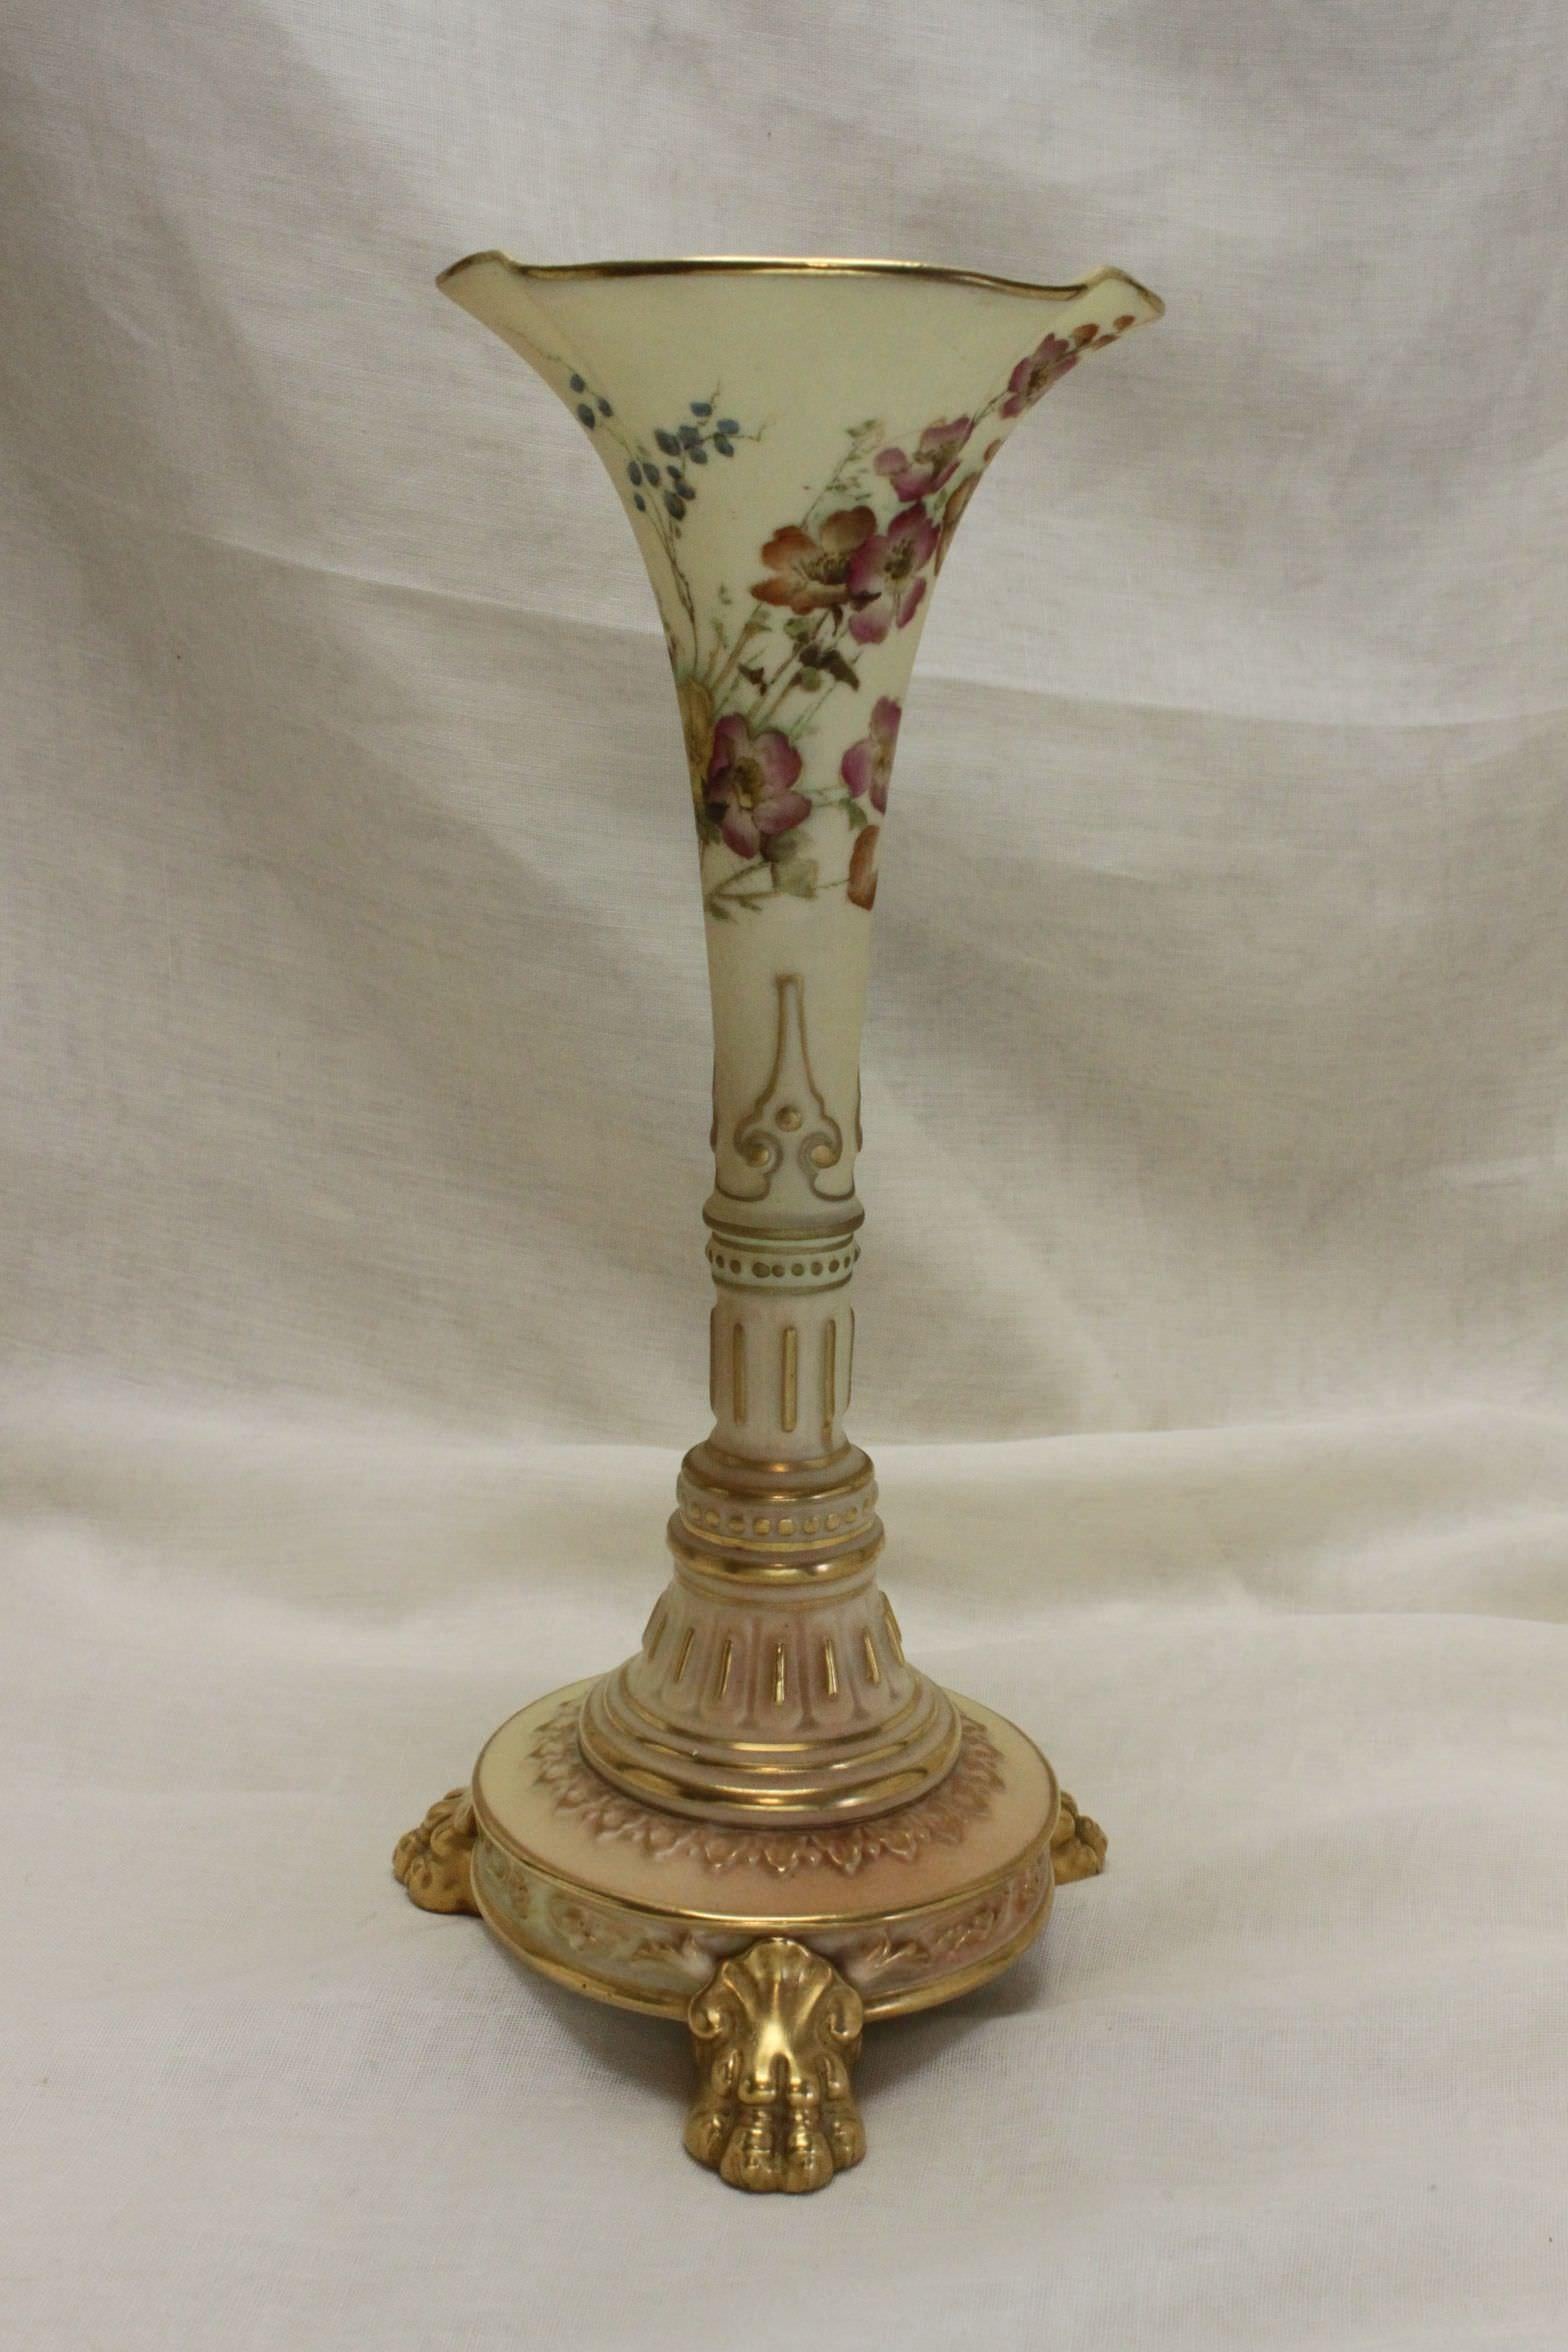 This unusual Royal Worcester vase is shown in the Worcester list of shapes as a 